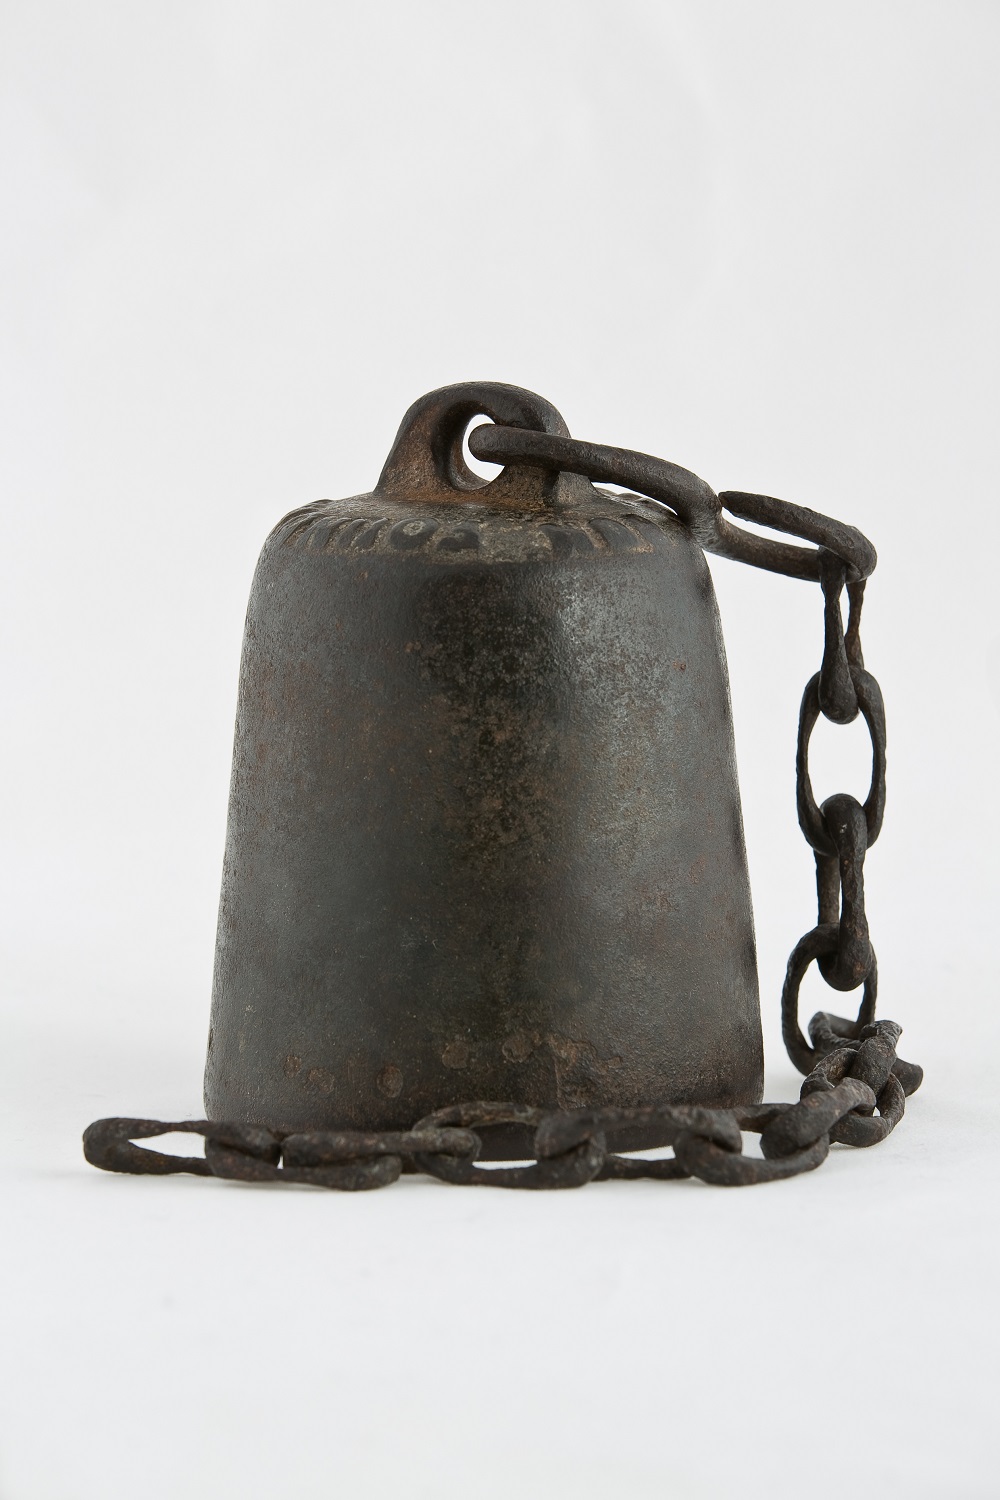 Metal drinking cup with chain from the water fountain with Greyfriars Bobby statue on top